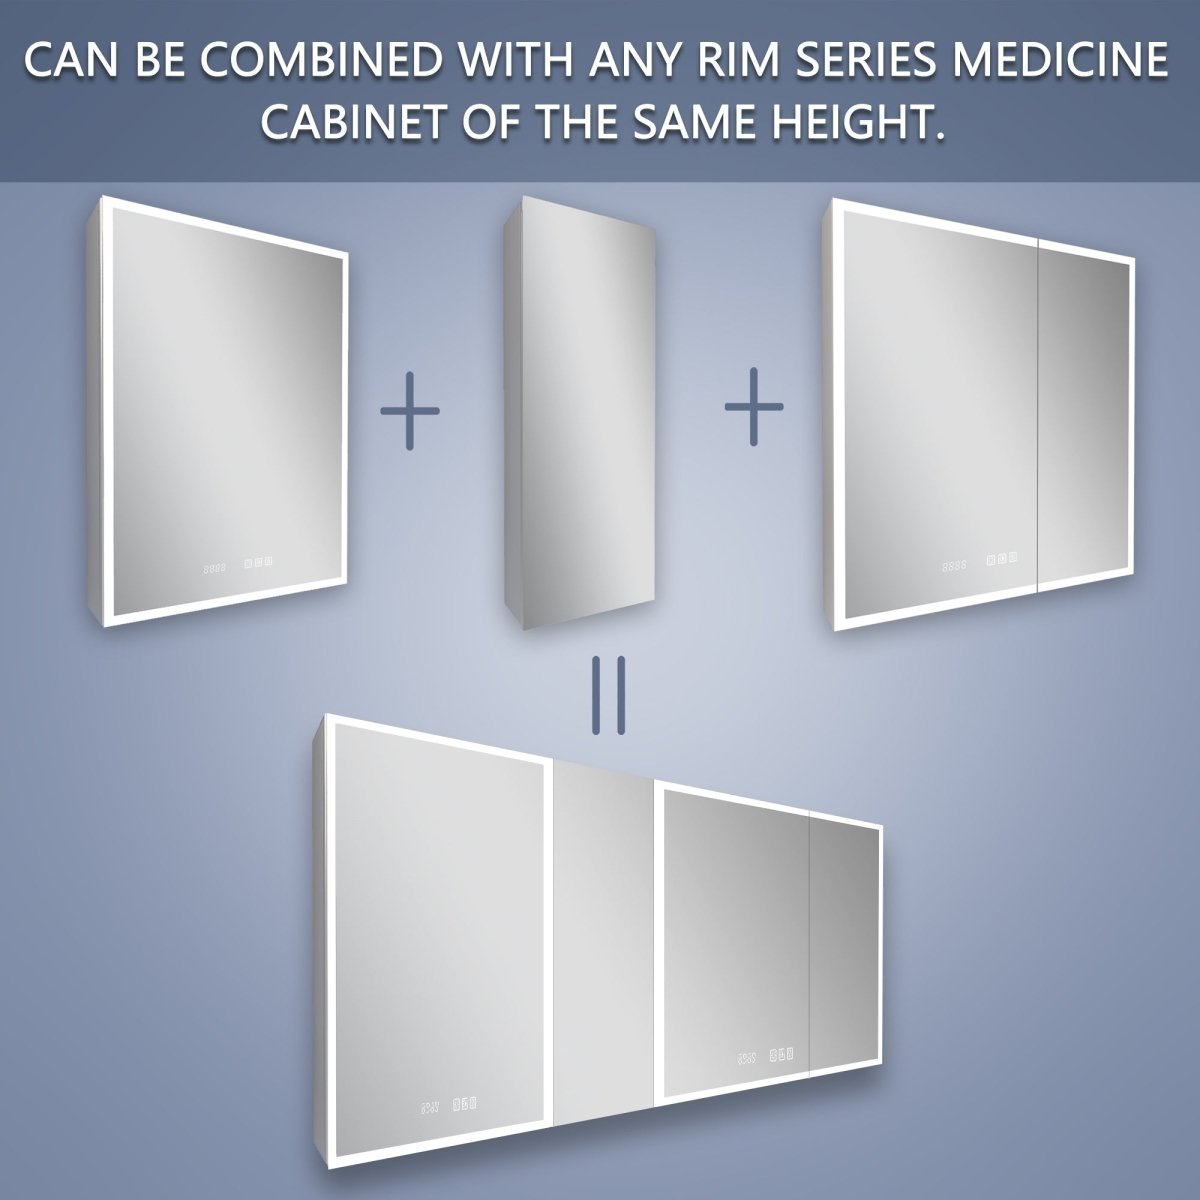 Rim 12 in. W X 32 in. H Single Medicine Cabinet without Light